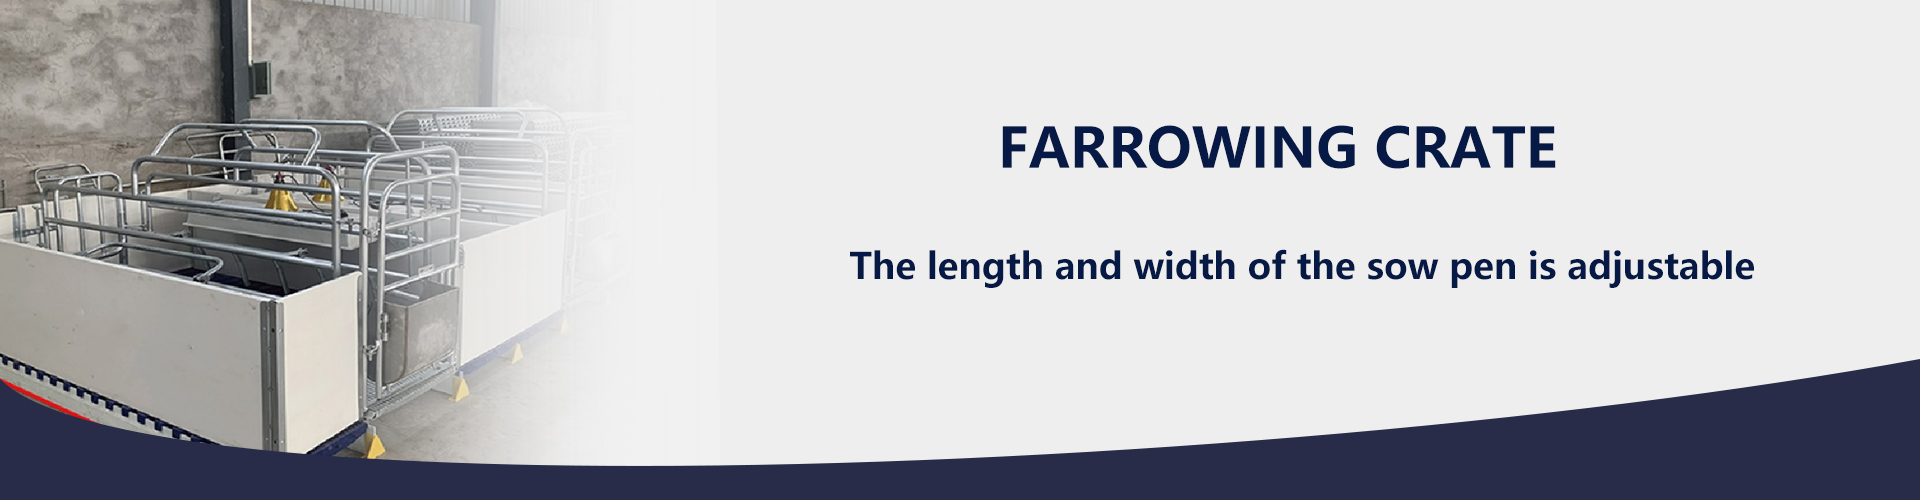 FARROWING-CRATE-banner